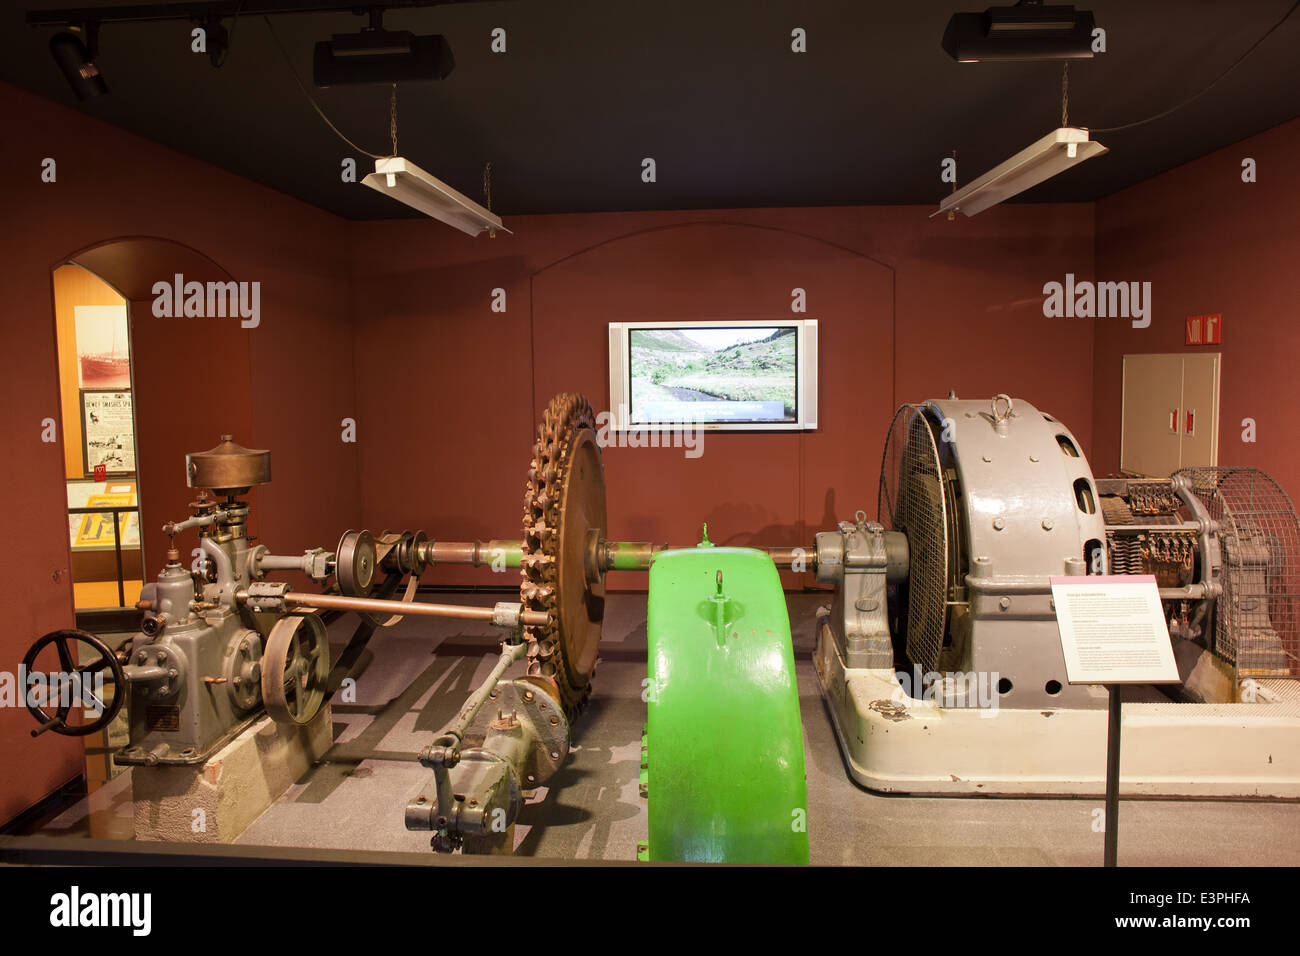 Hydroelectric power machinery in Museum of the History of Catalonia interior in Barcelona, Spain. Stock Photo